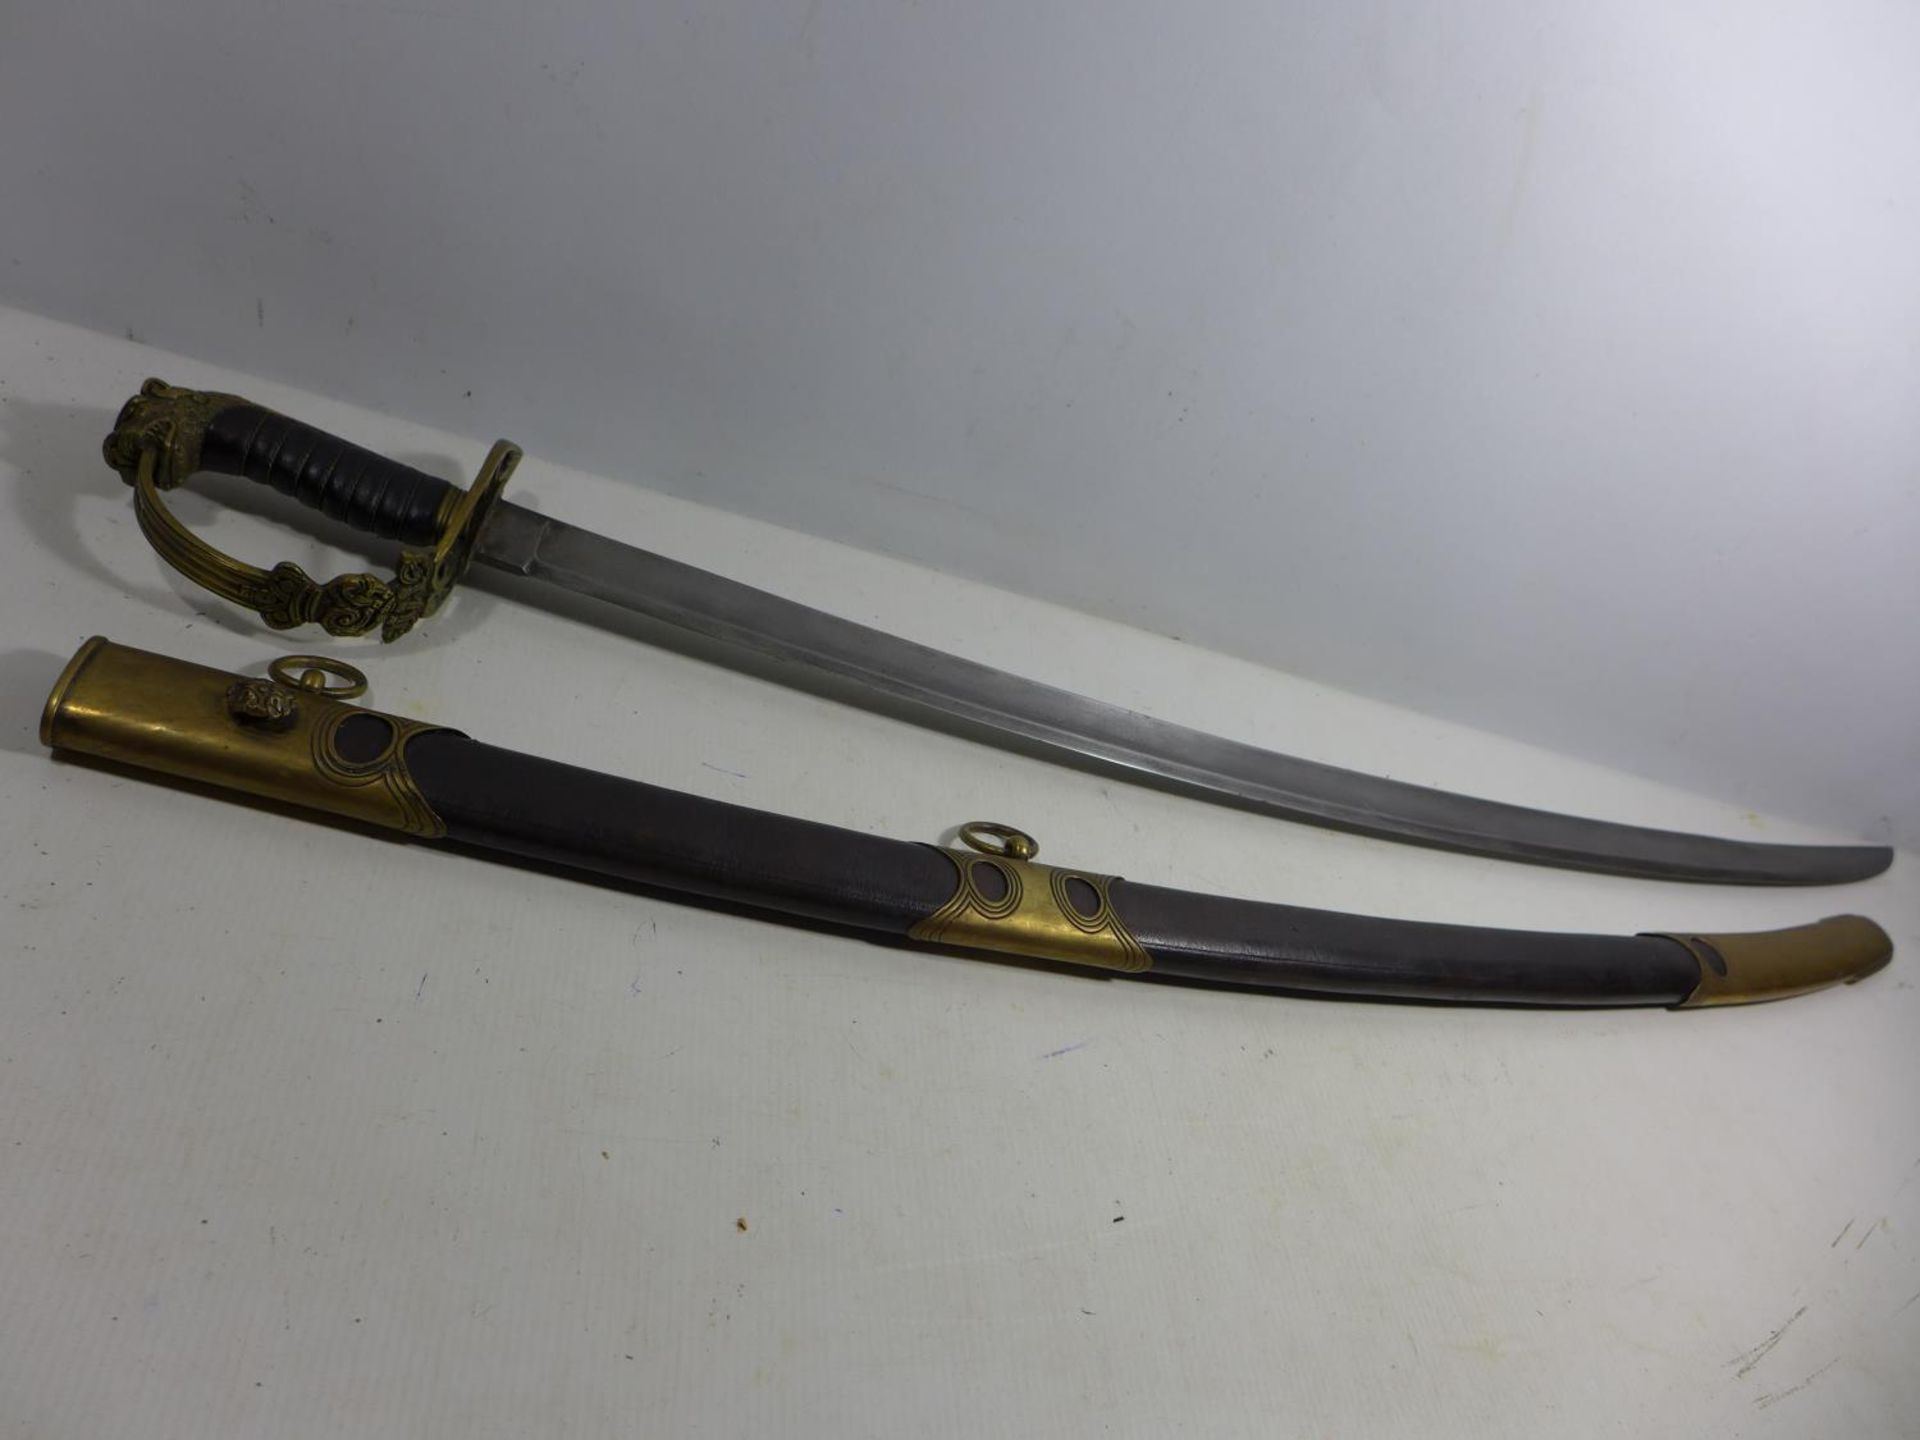 A REPLICA OF A BRITISH NAPOLEONIC WAR OFFICERS SWORD AND SCABBARD, 81CM BLADE, LENGTH 96CM